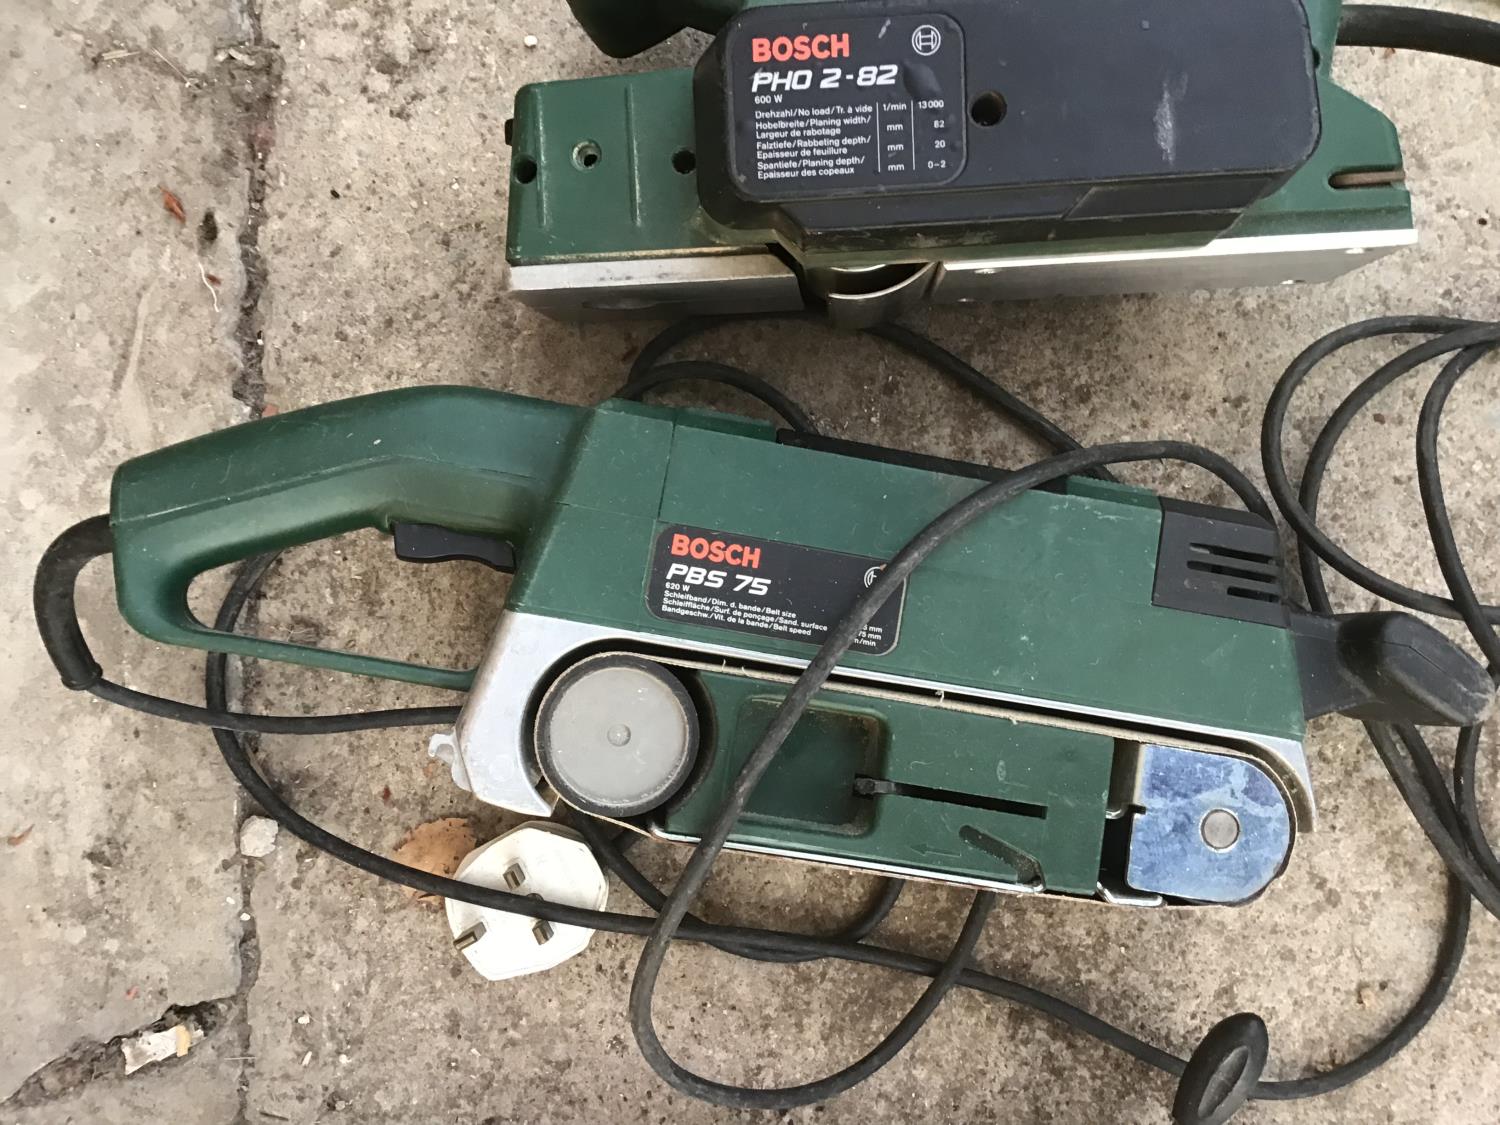 A BOSCH PHO 2 - 82 PLANER AND A BOSCH PBS 75 BELT SANDER IN WORKING ORDER - Image 3 of 3